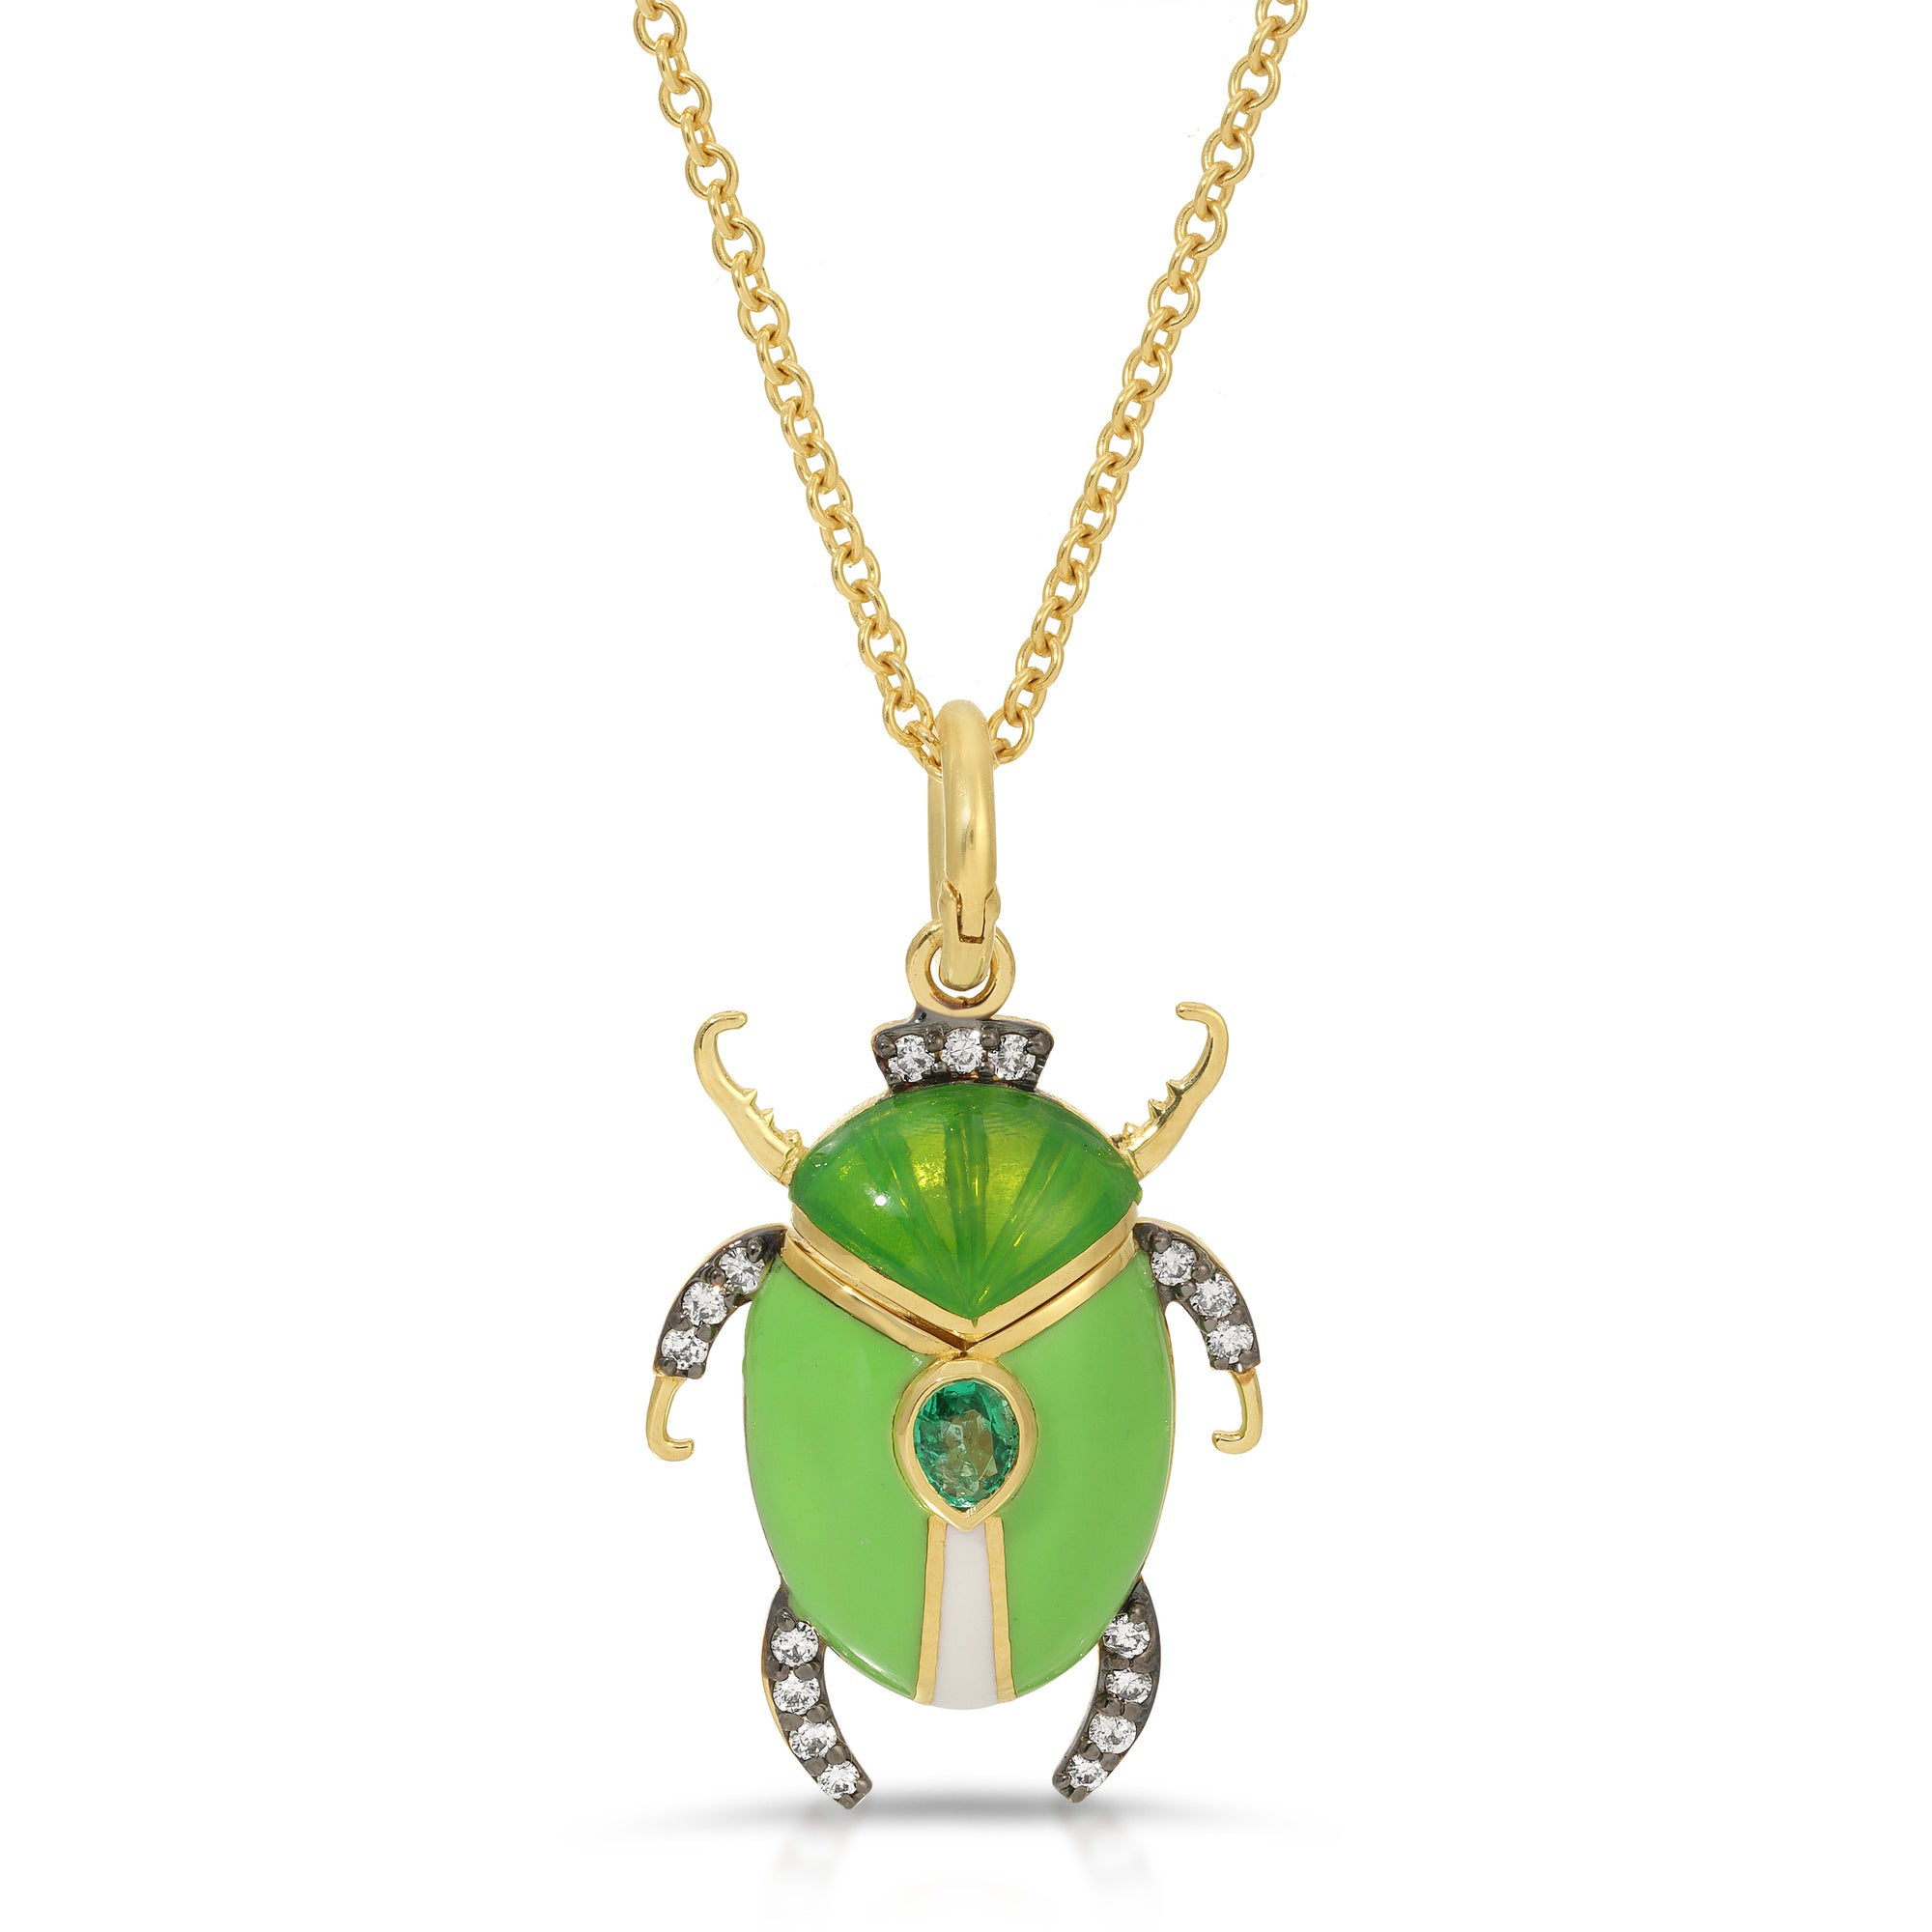 Emerald Enamel Beetle Necklace by Lord Jewelry available at Talisman Collection Fine Jewelers in El Dorado Hills, CA and online.Embrace the allure of ancient Egypt with the Emerald Scarab Beetle Pendant Necklace. Crafted in luxurious 18k yellow gold, this captivating charm showcases a stunning plique-à-jour enamel scarab, meticulously accented with a 0.19 carat pear-cut emerald and 0.14 carats of shimmering diamonds. 